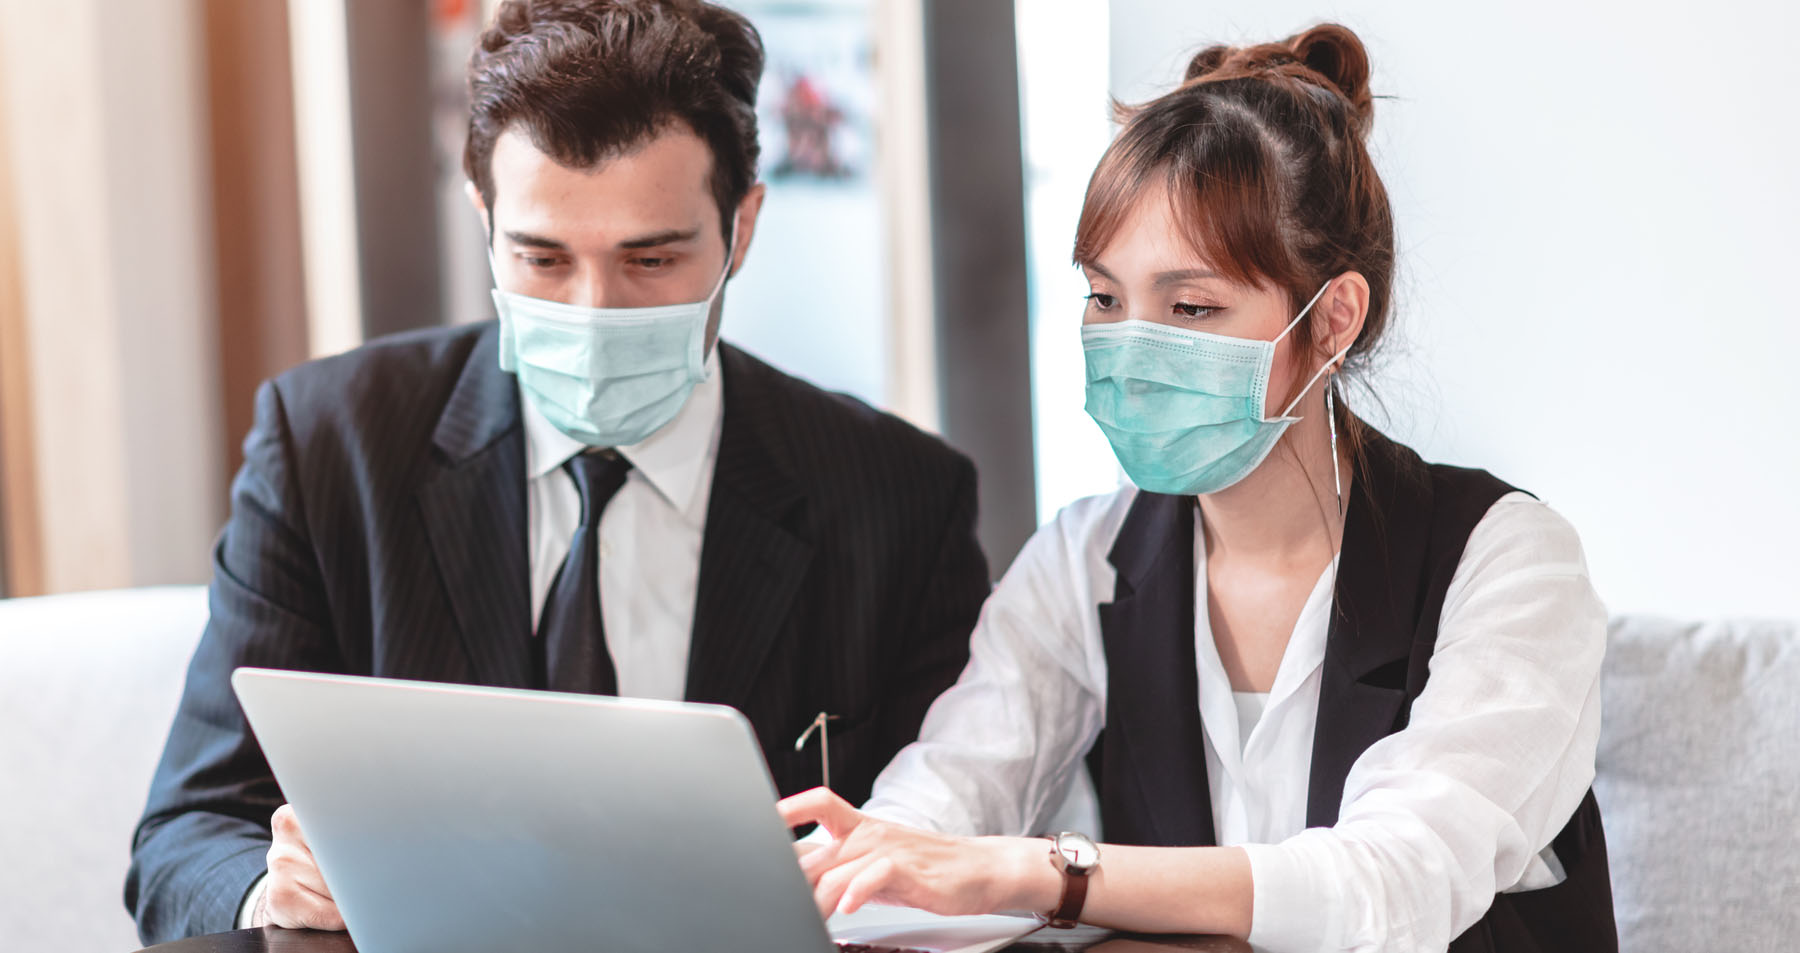 A young man and woman dressed in business attire with PPE masks on sit next to each other reviewing something on an open laptop in front of them